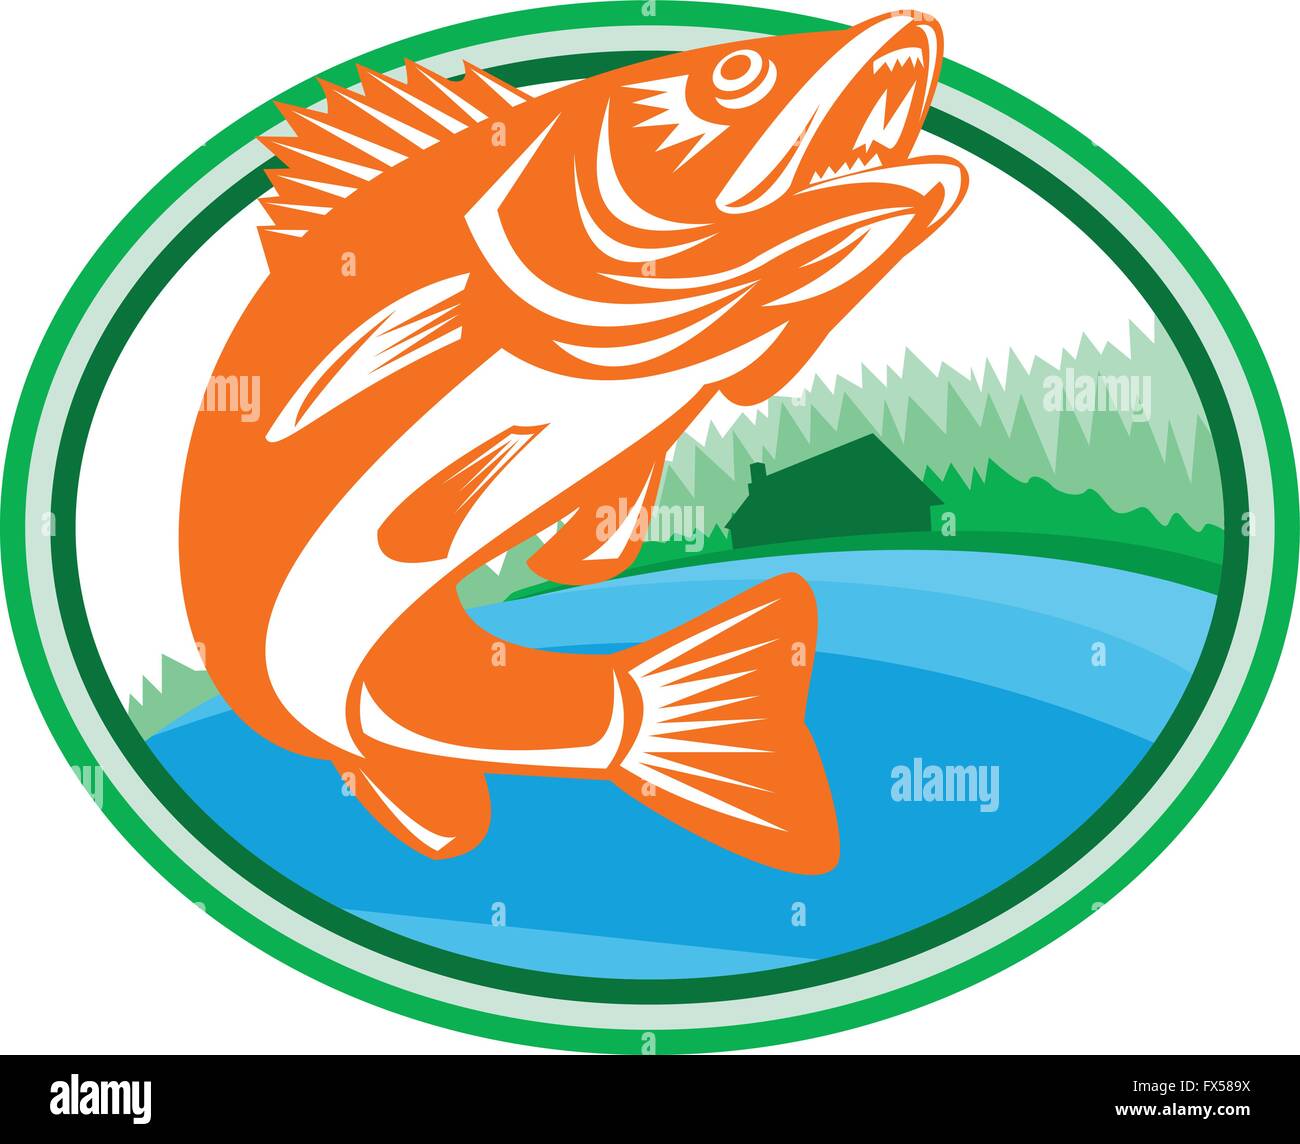 Illustration of a Walleye (Sander vitreus, formerly Stizostedion vitreum), a freshwater perciform fish with lake and cabin in the woods in the background set inside oval shape done in retro style. Stock Vector